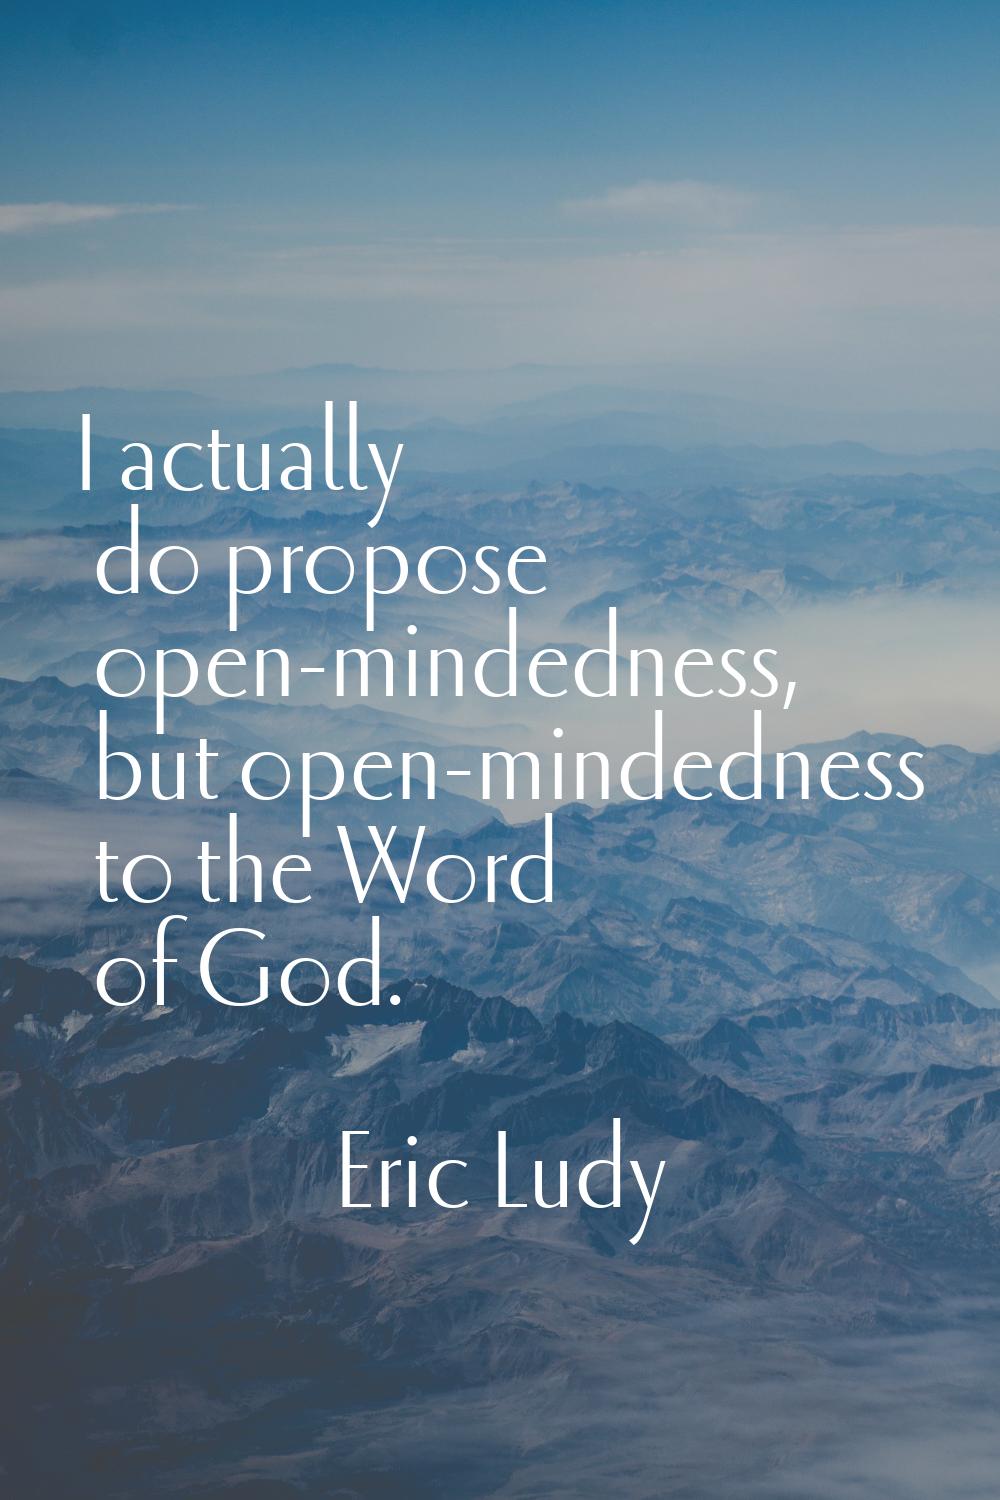 I actually do propose open-mindedness, but open-mindedness to the Word of God.